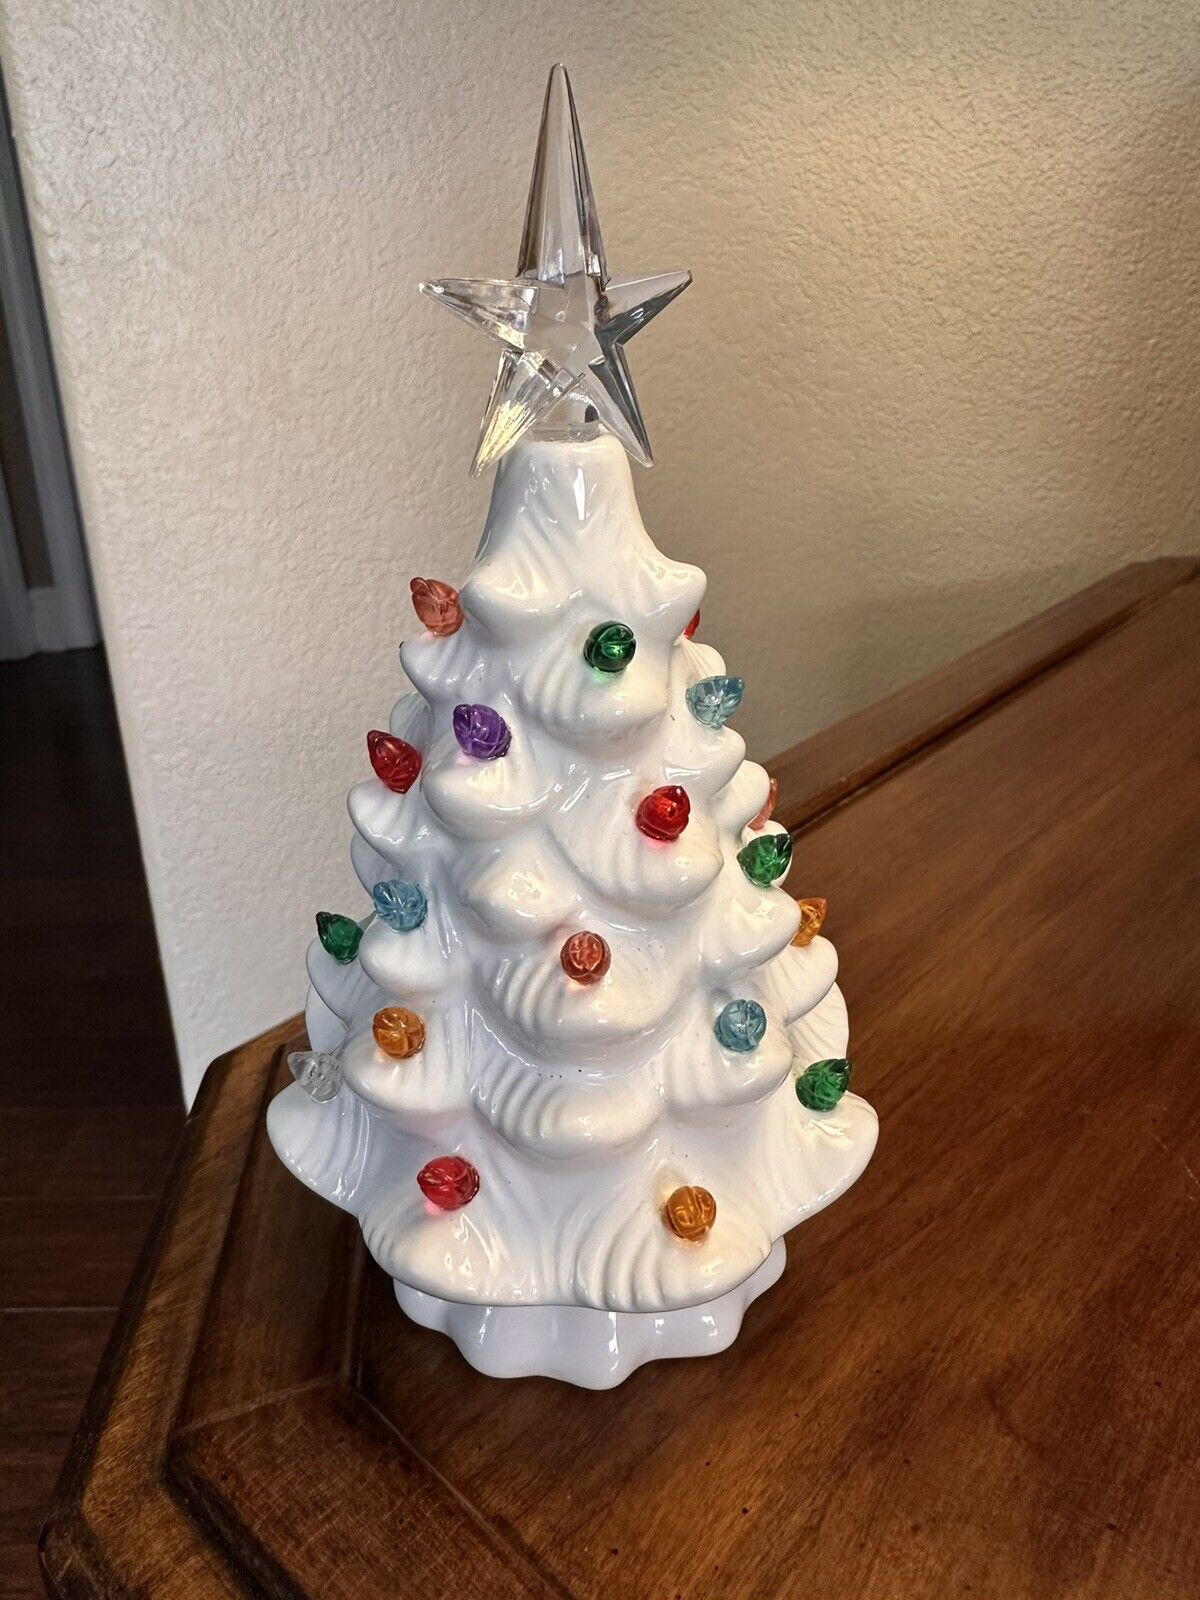 White Ceramic Light Up Tree 7.5” Battery Operated Multi colored Lights